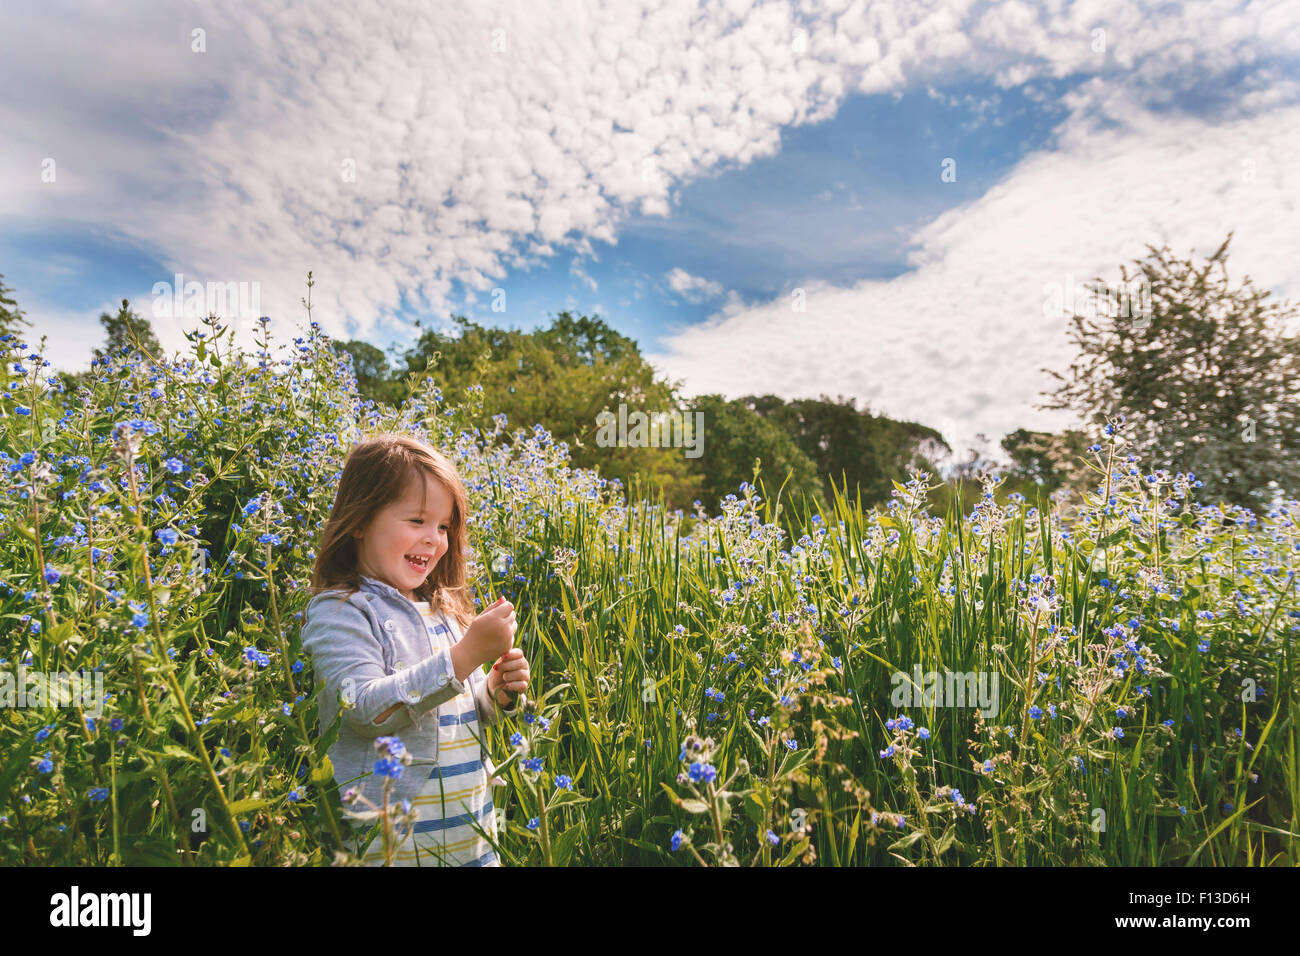 Smiling Girl picking flowers in field Stock Photo